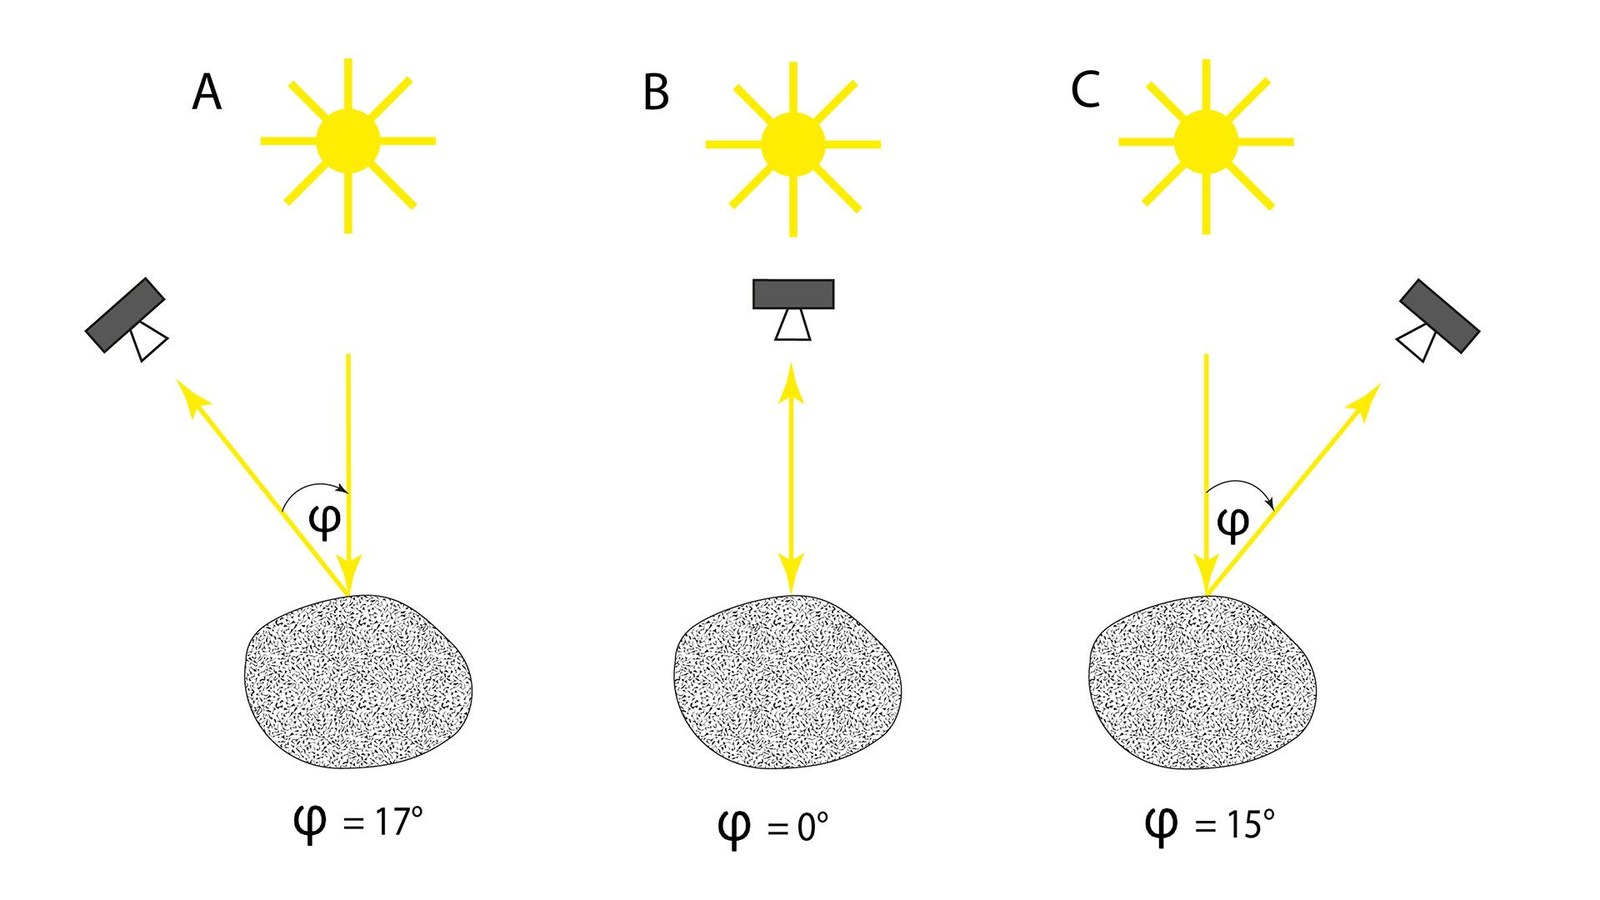 Schematic representation of phase angle change in the animation